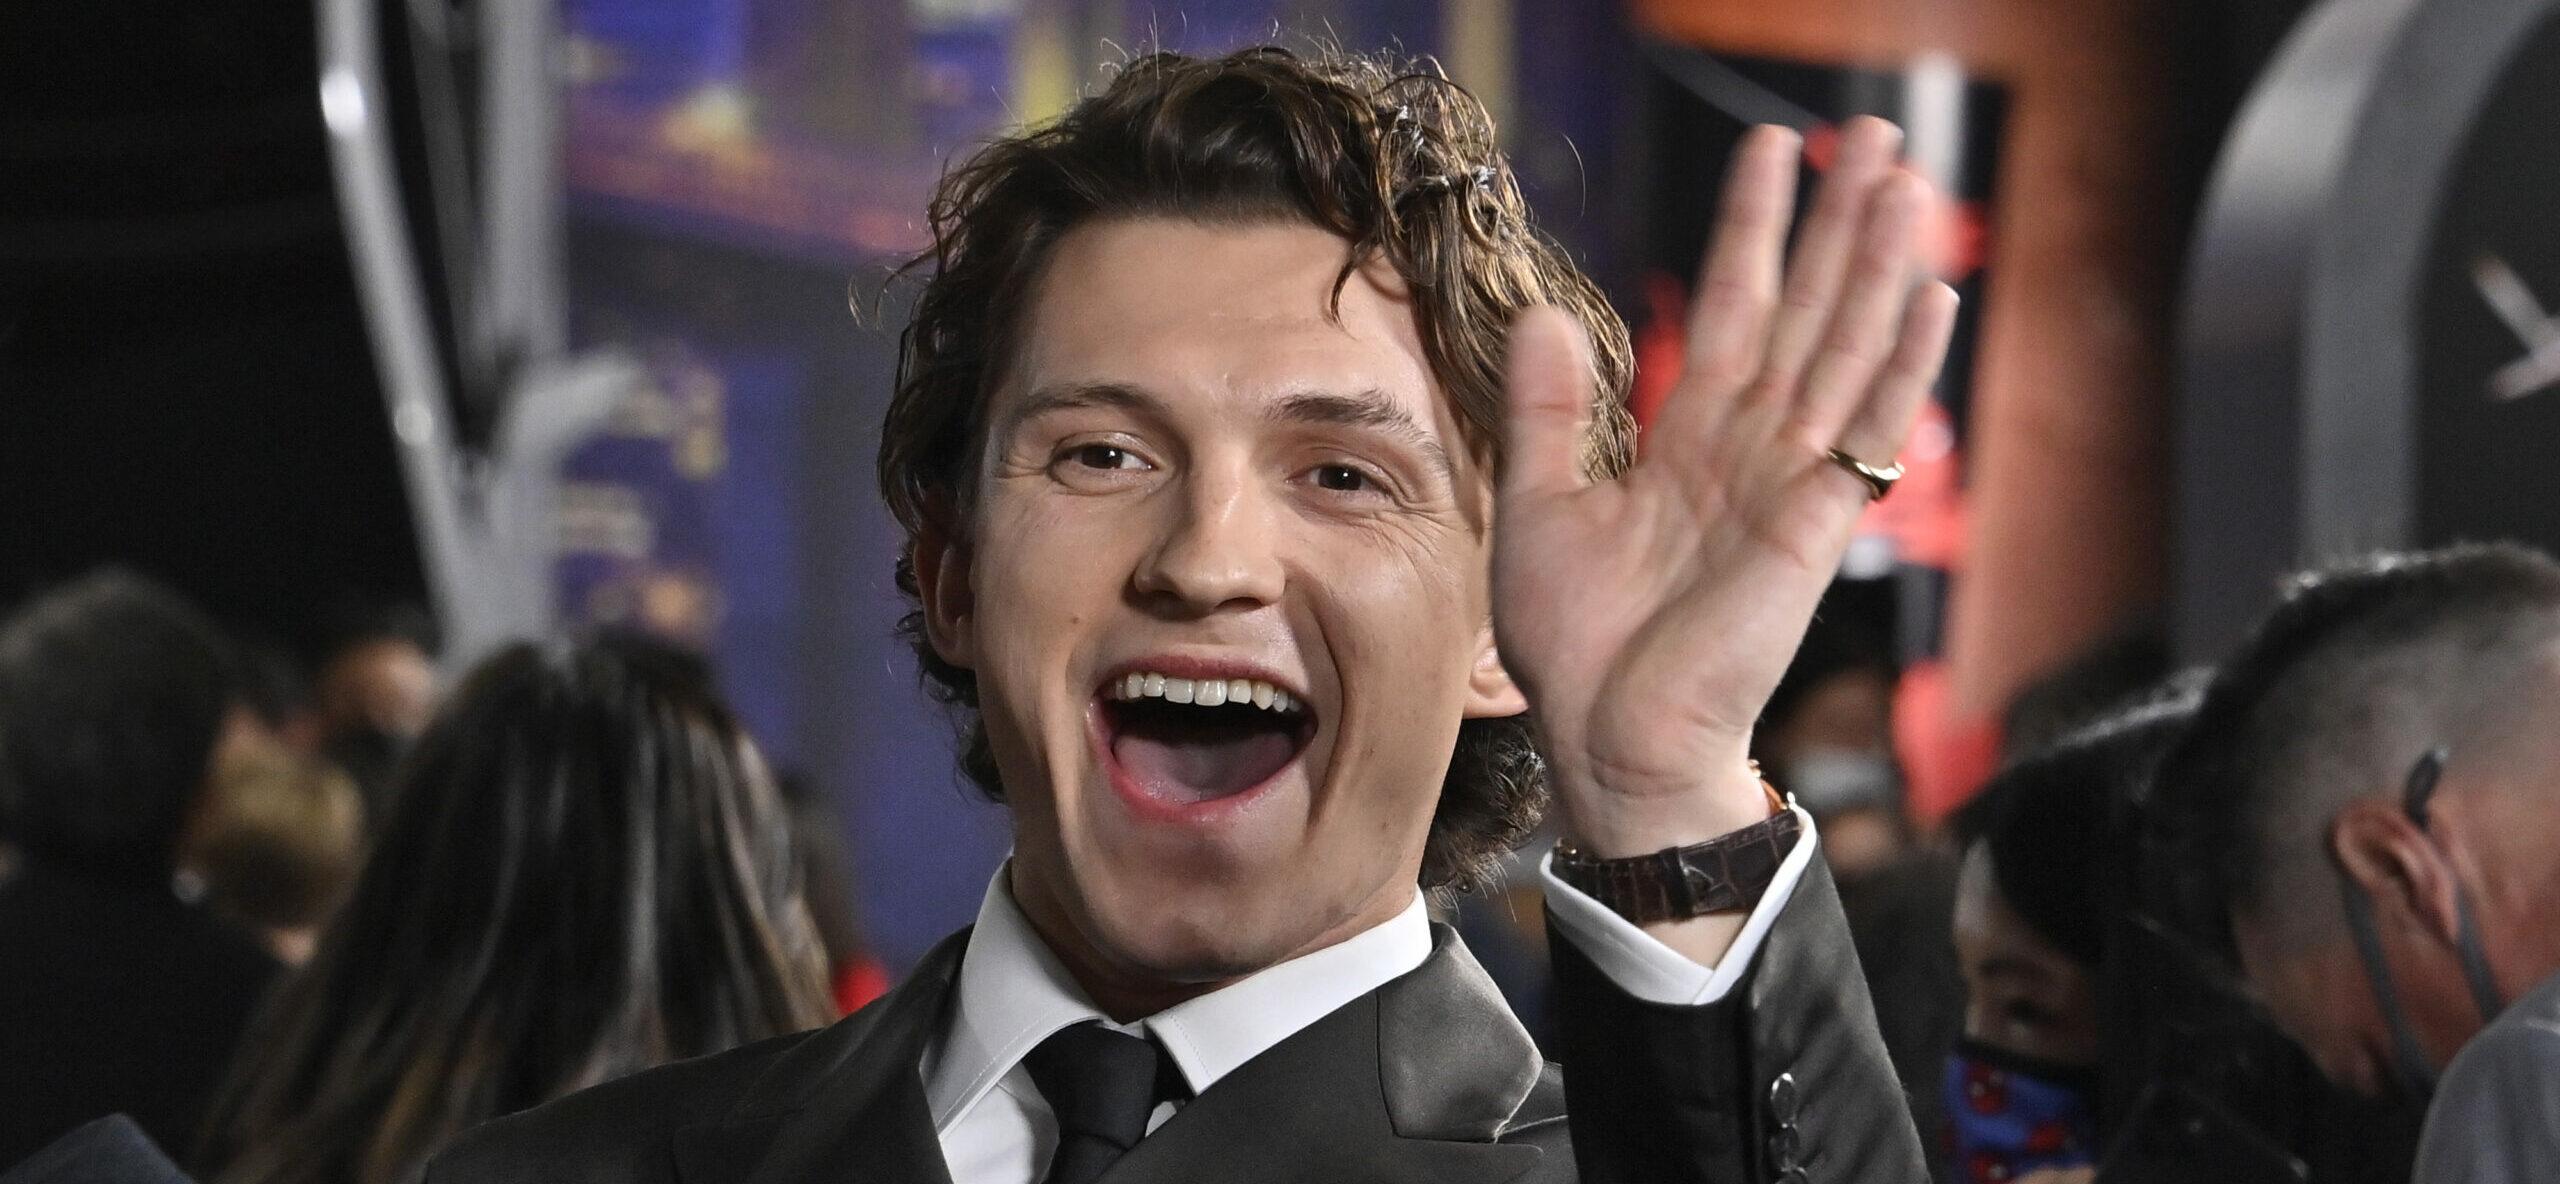 Tom Holland attends the premiere of the sci-fi motion picture 